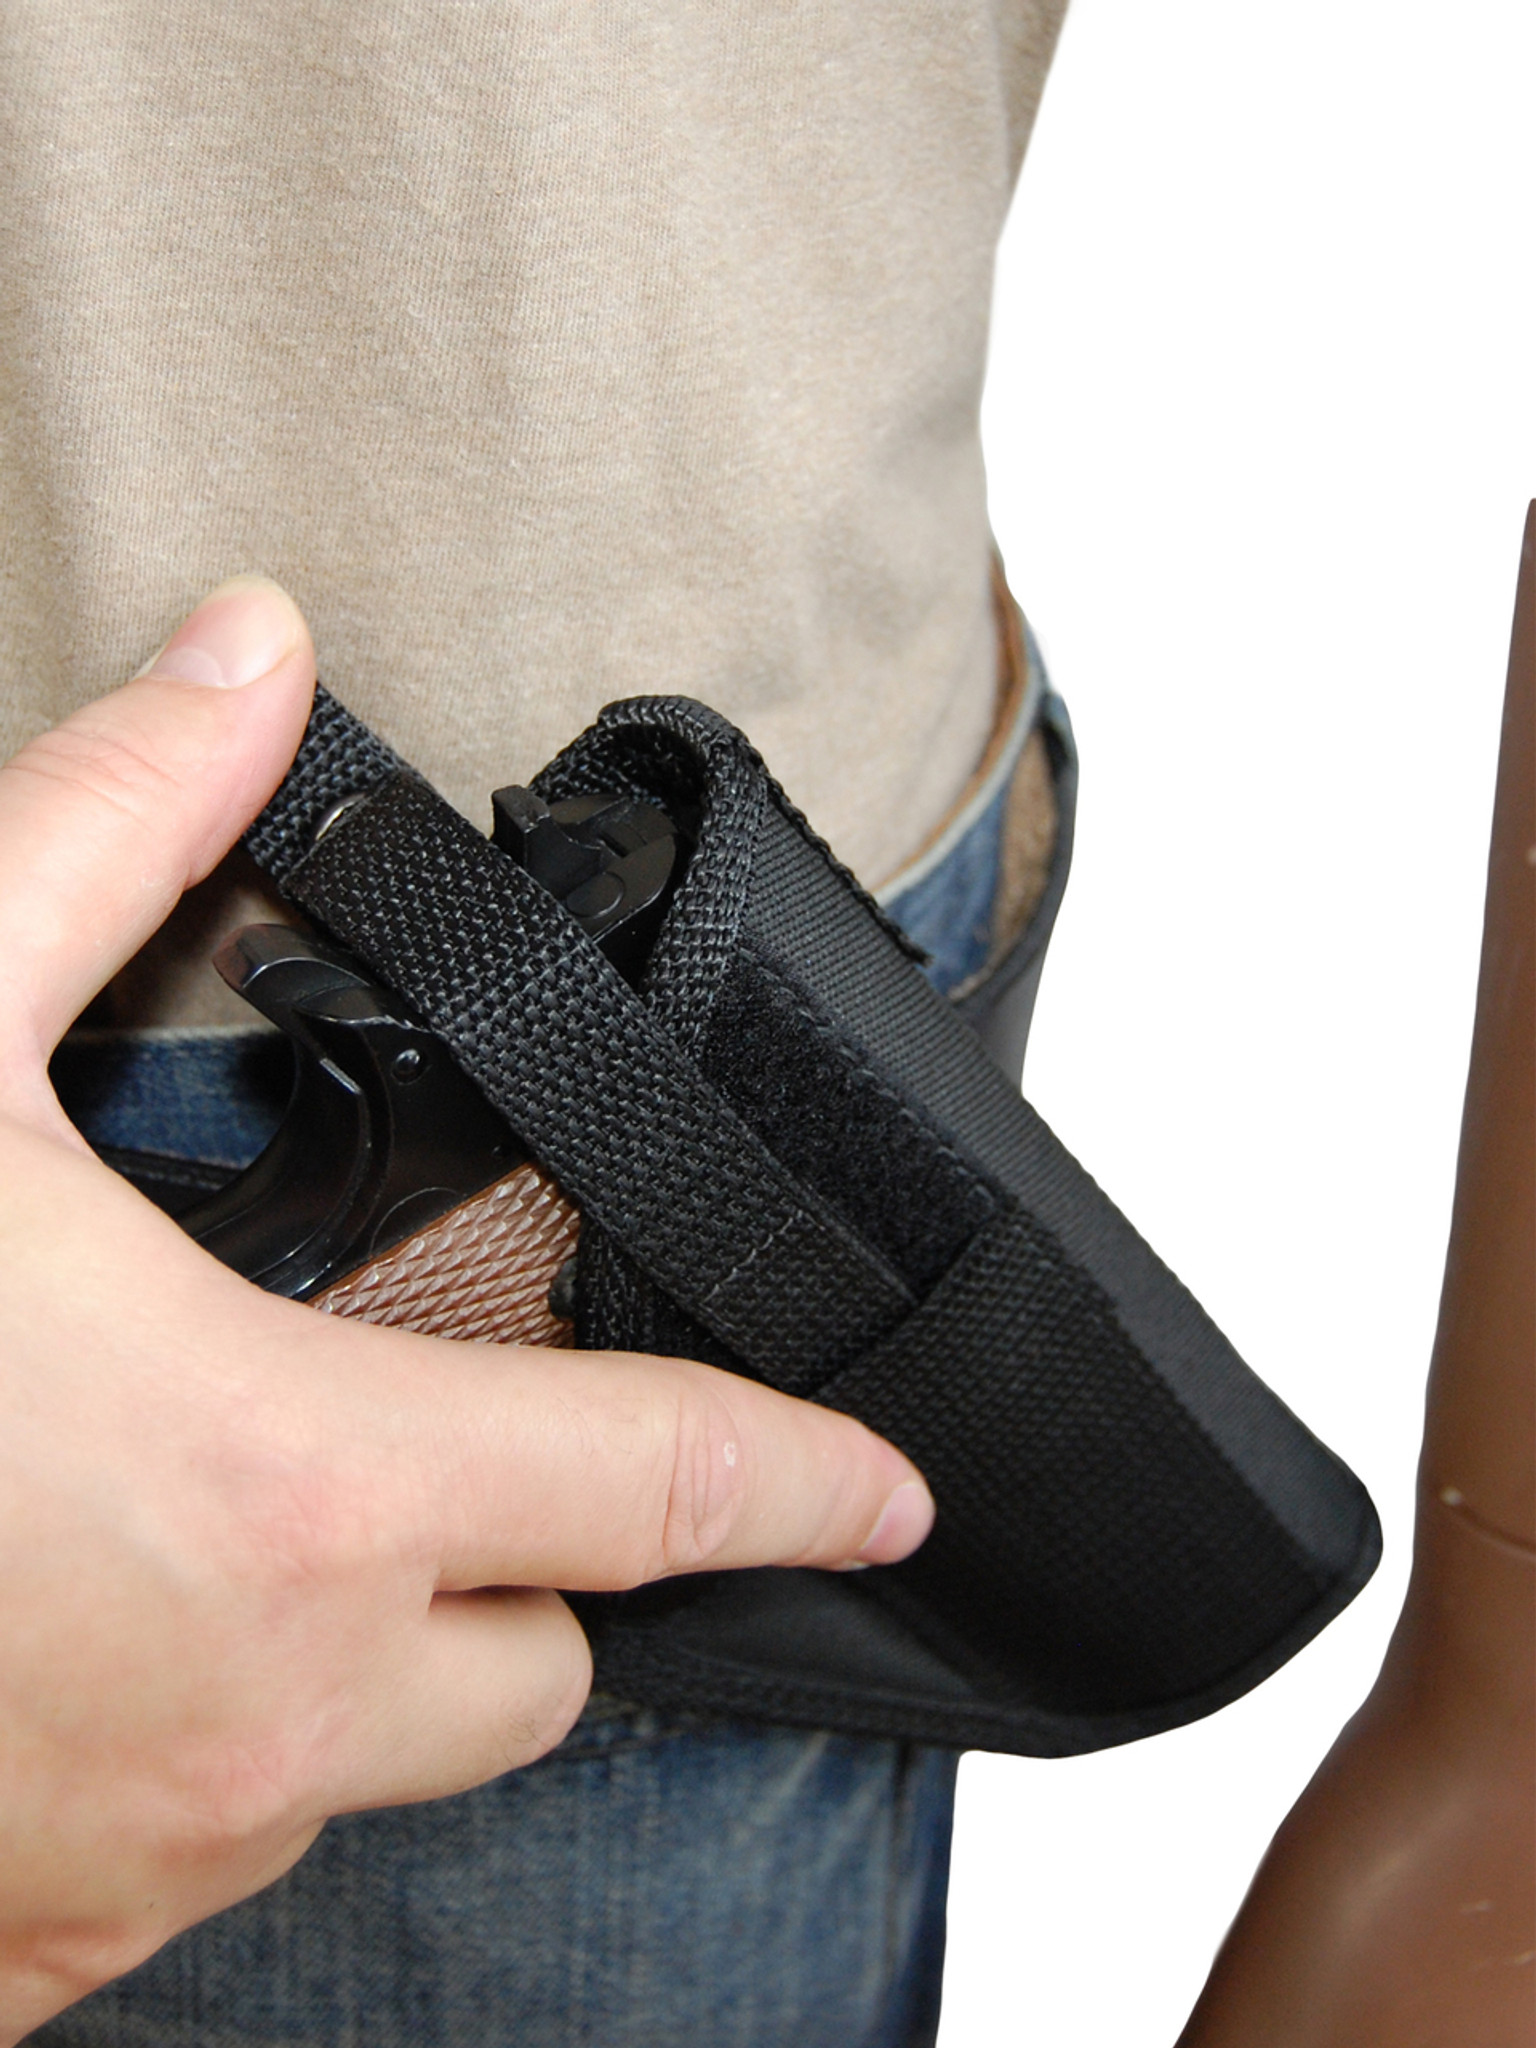 Cross Draw Holster for Compact, Sub-Compact 9mm 40 45 Pistols - Barsony